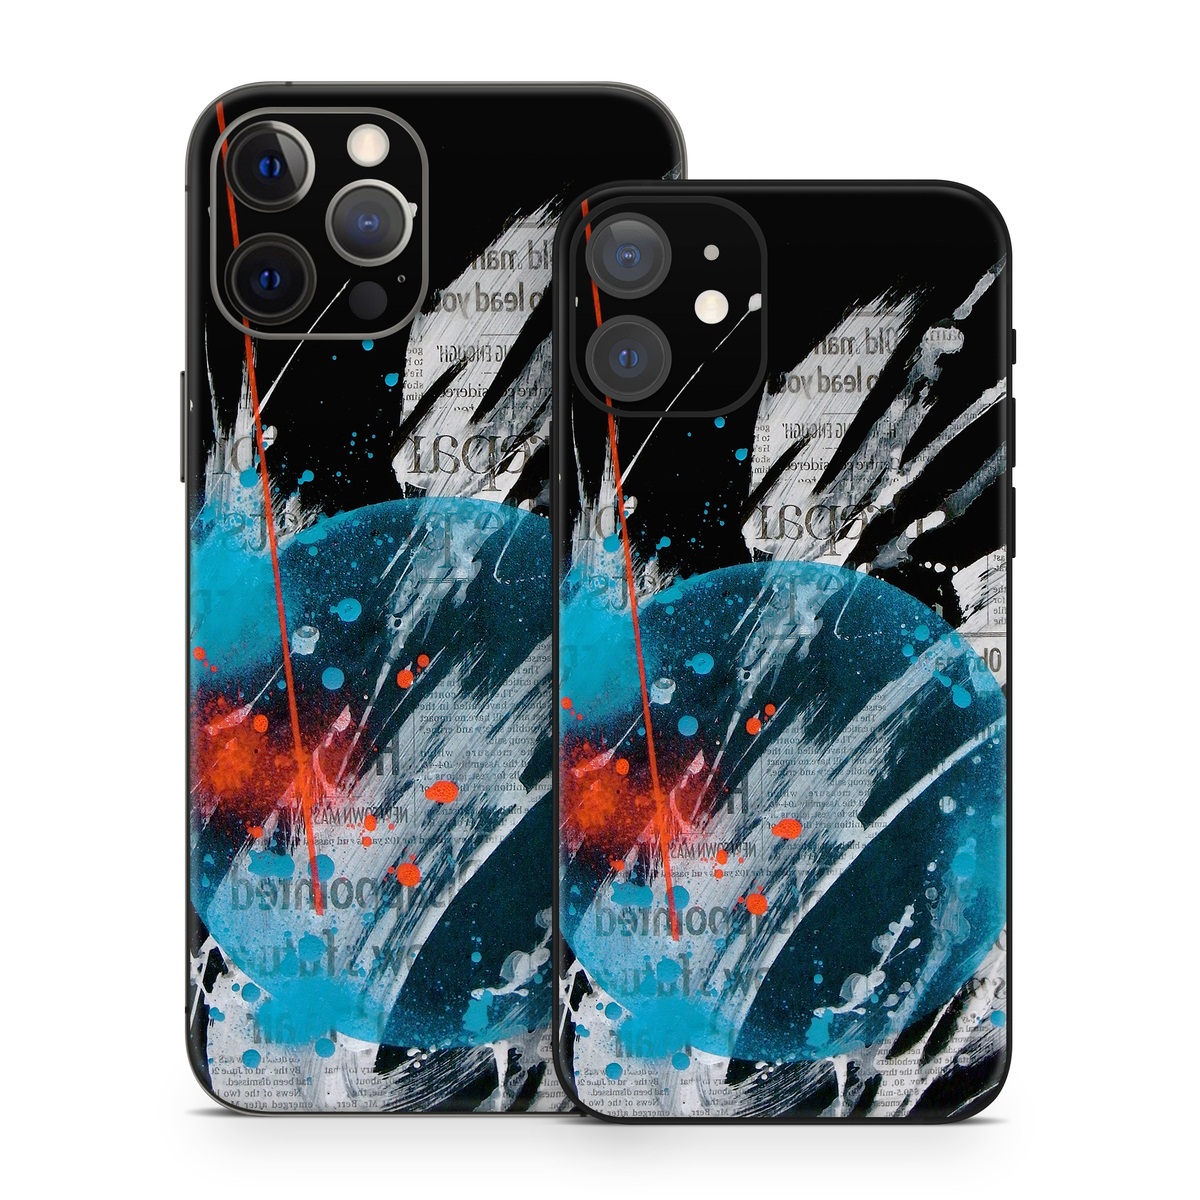 iPhone 12 Series Skin design of Graphic design, Illustration, Graphics, Design, Art, Space, World, with black, gray, blue, red colors